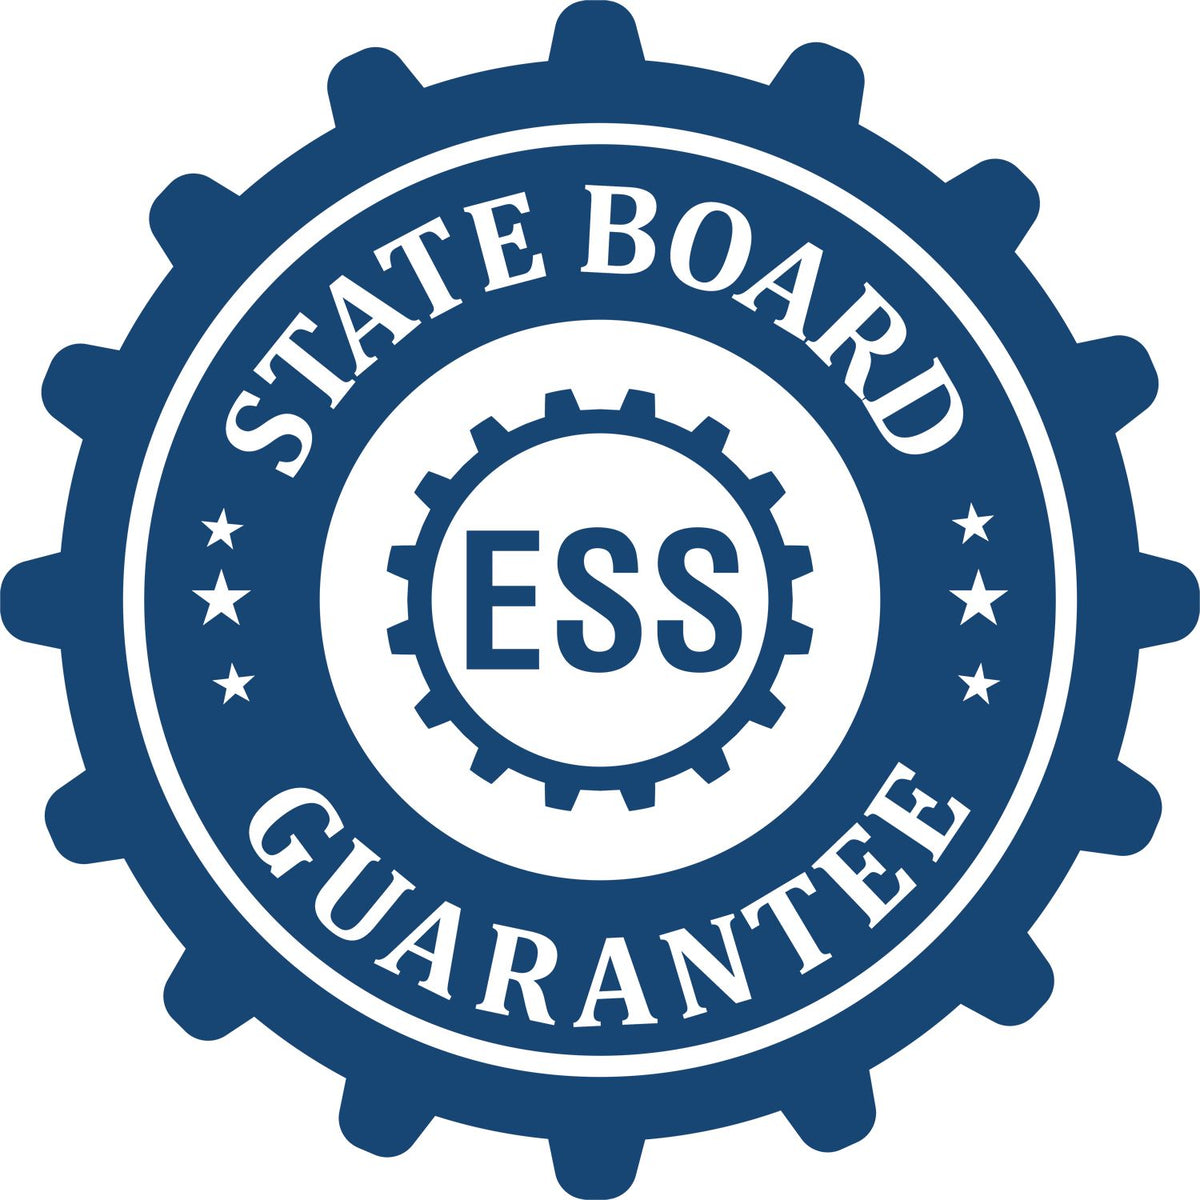 An emblem in a gear shape illustrating a state board guarantee for the Utah Geologist Desk Seal